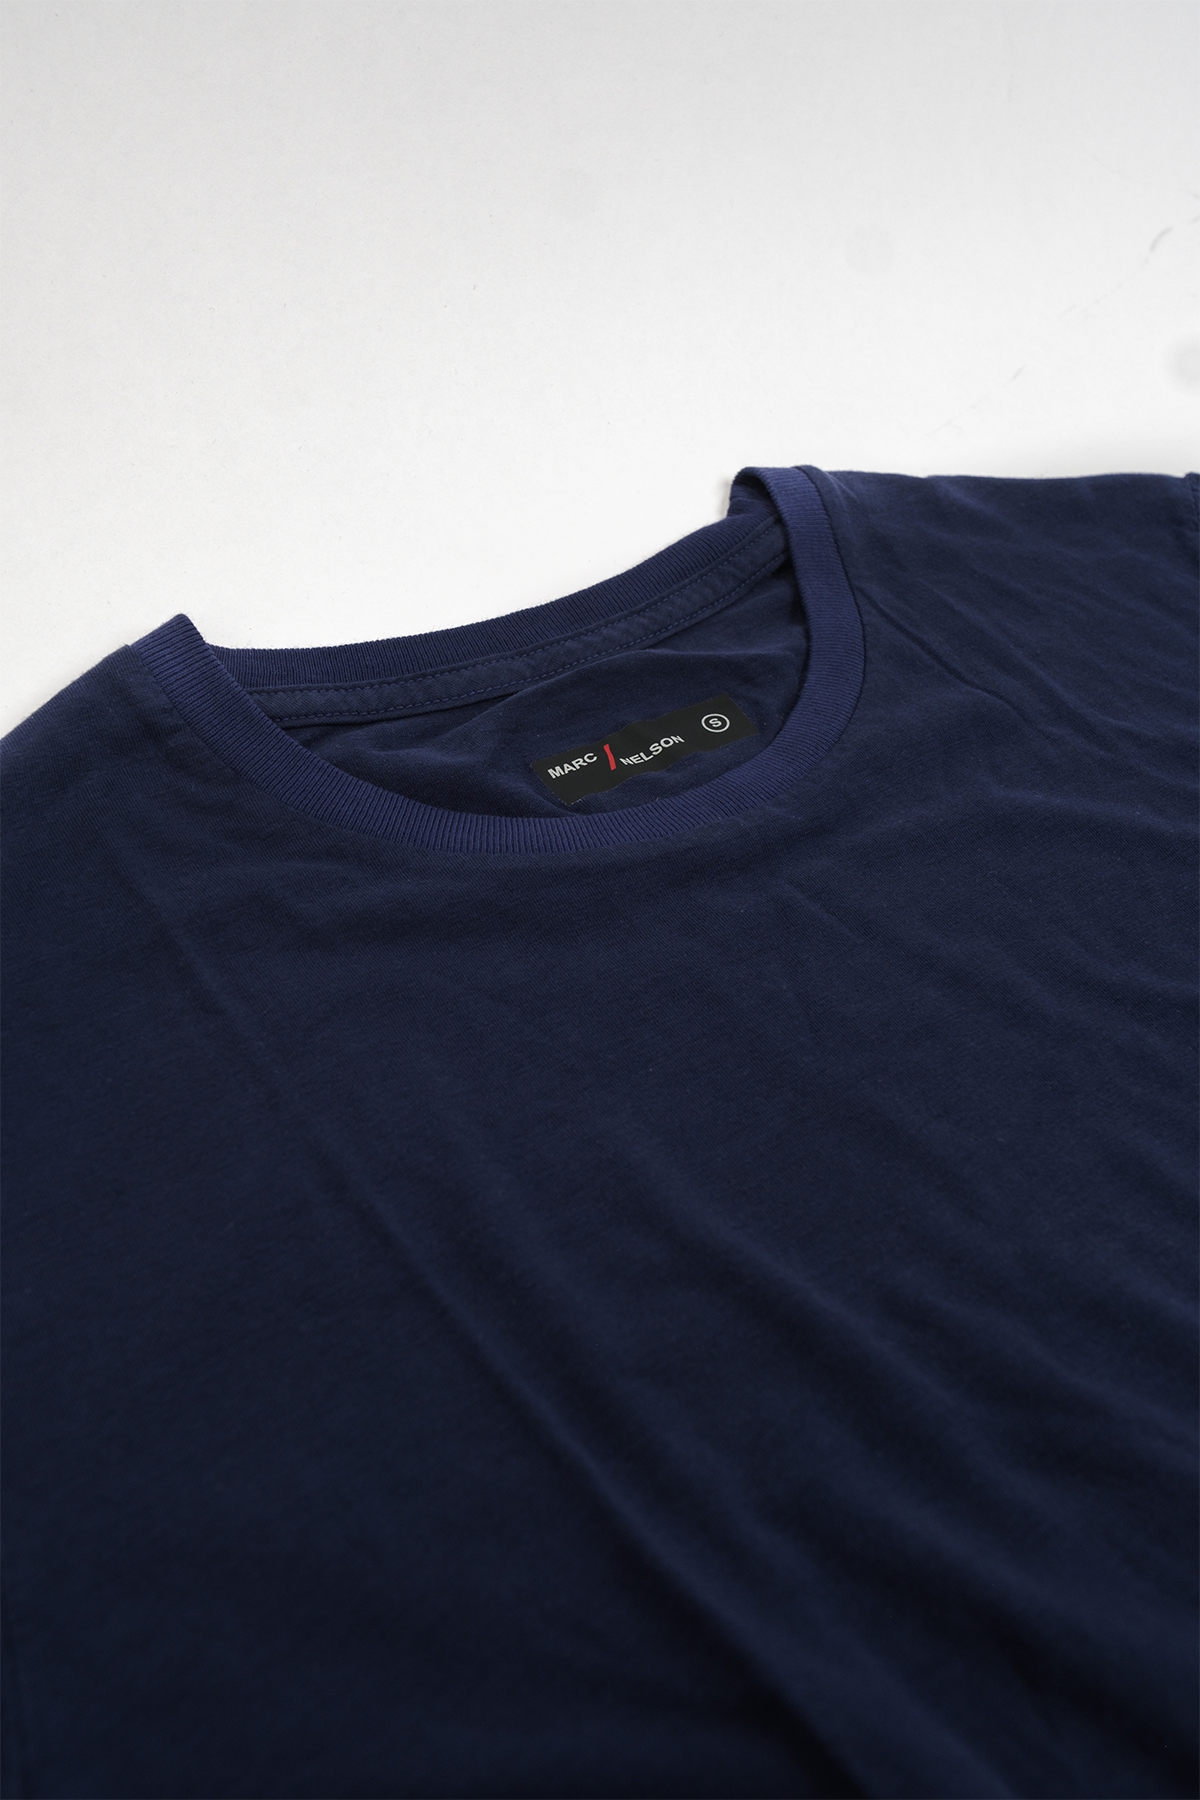 Navy crew neck t-shirt laid flat on a white background.